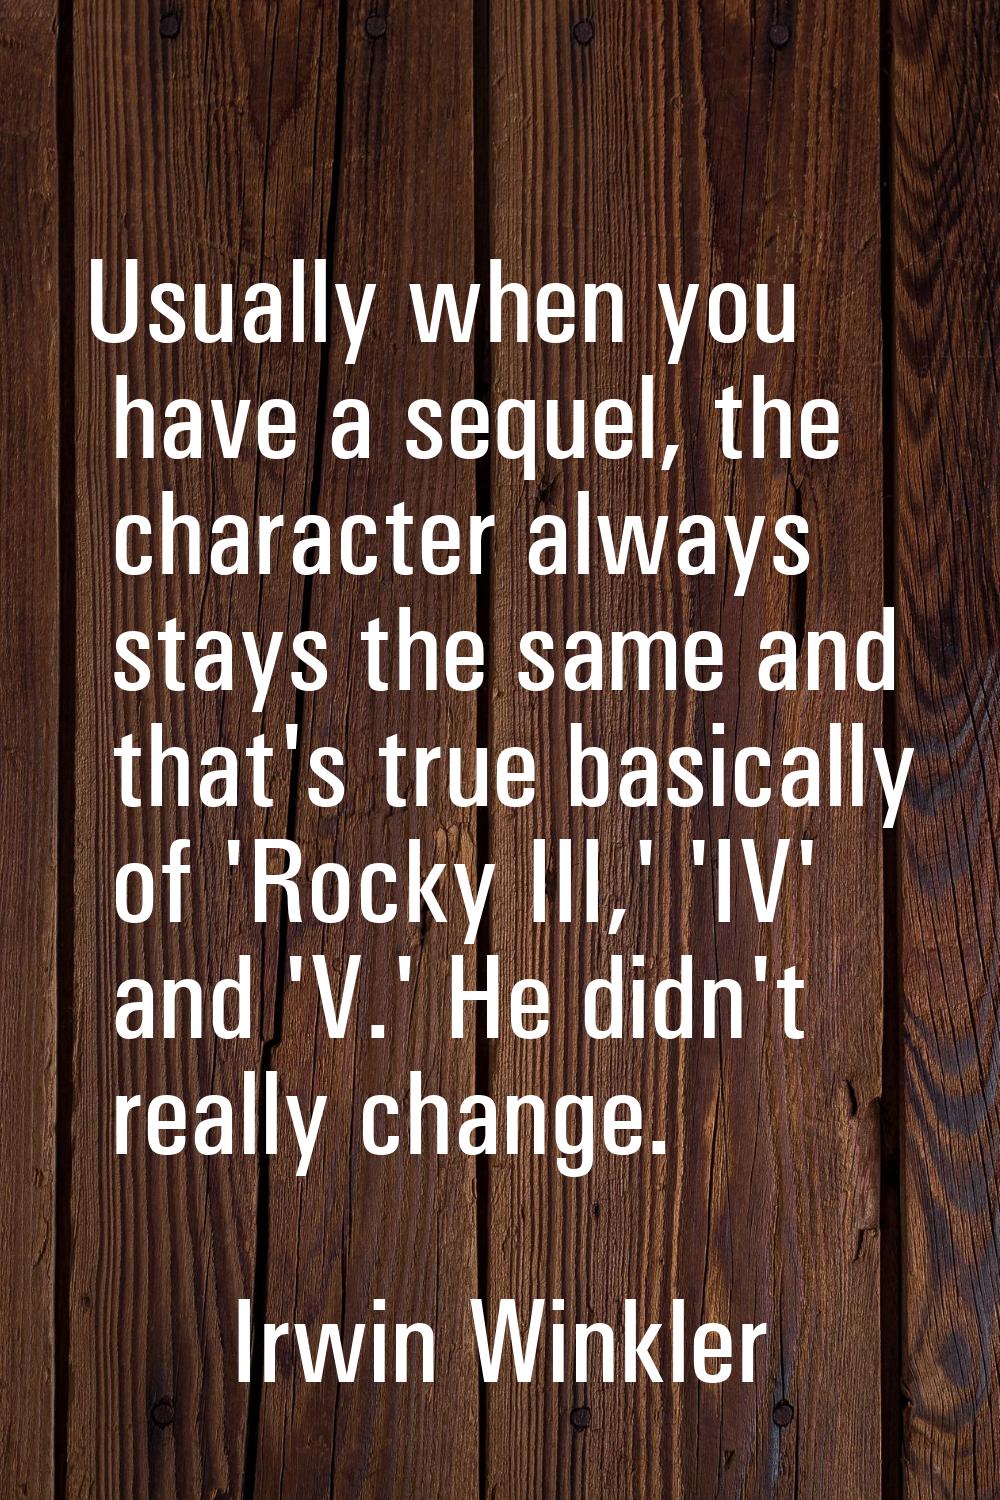 Usually when you have a sequel, the character always stays the same and that's true basically of 'R